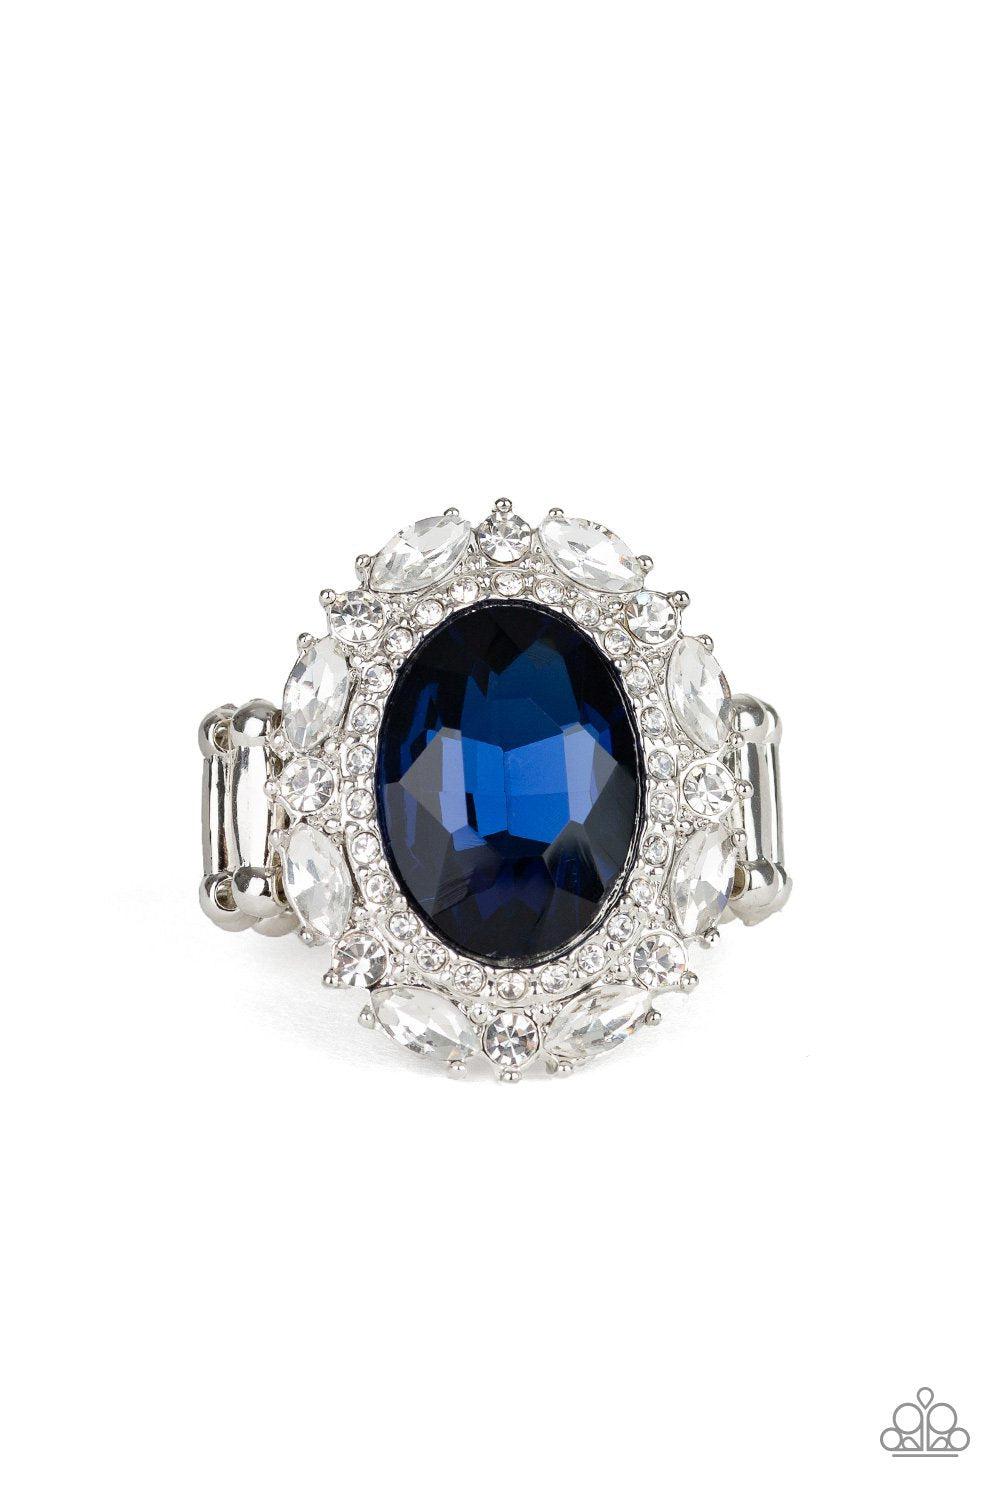 Show Glam Blue and White Rhinestone Ring - Paparazzi Accessories-CarasShop.com - $5 Jewelry by Cara Jewels